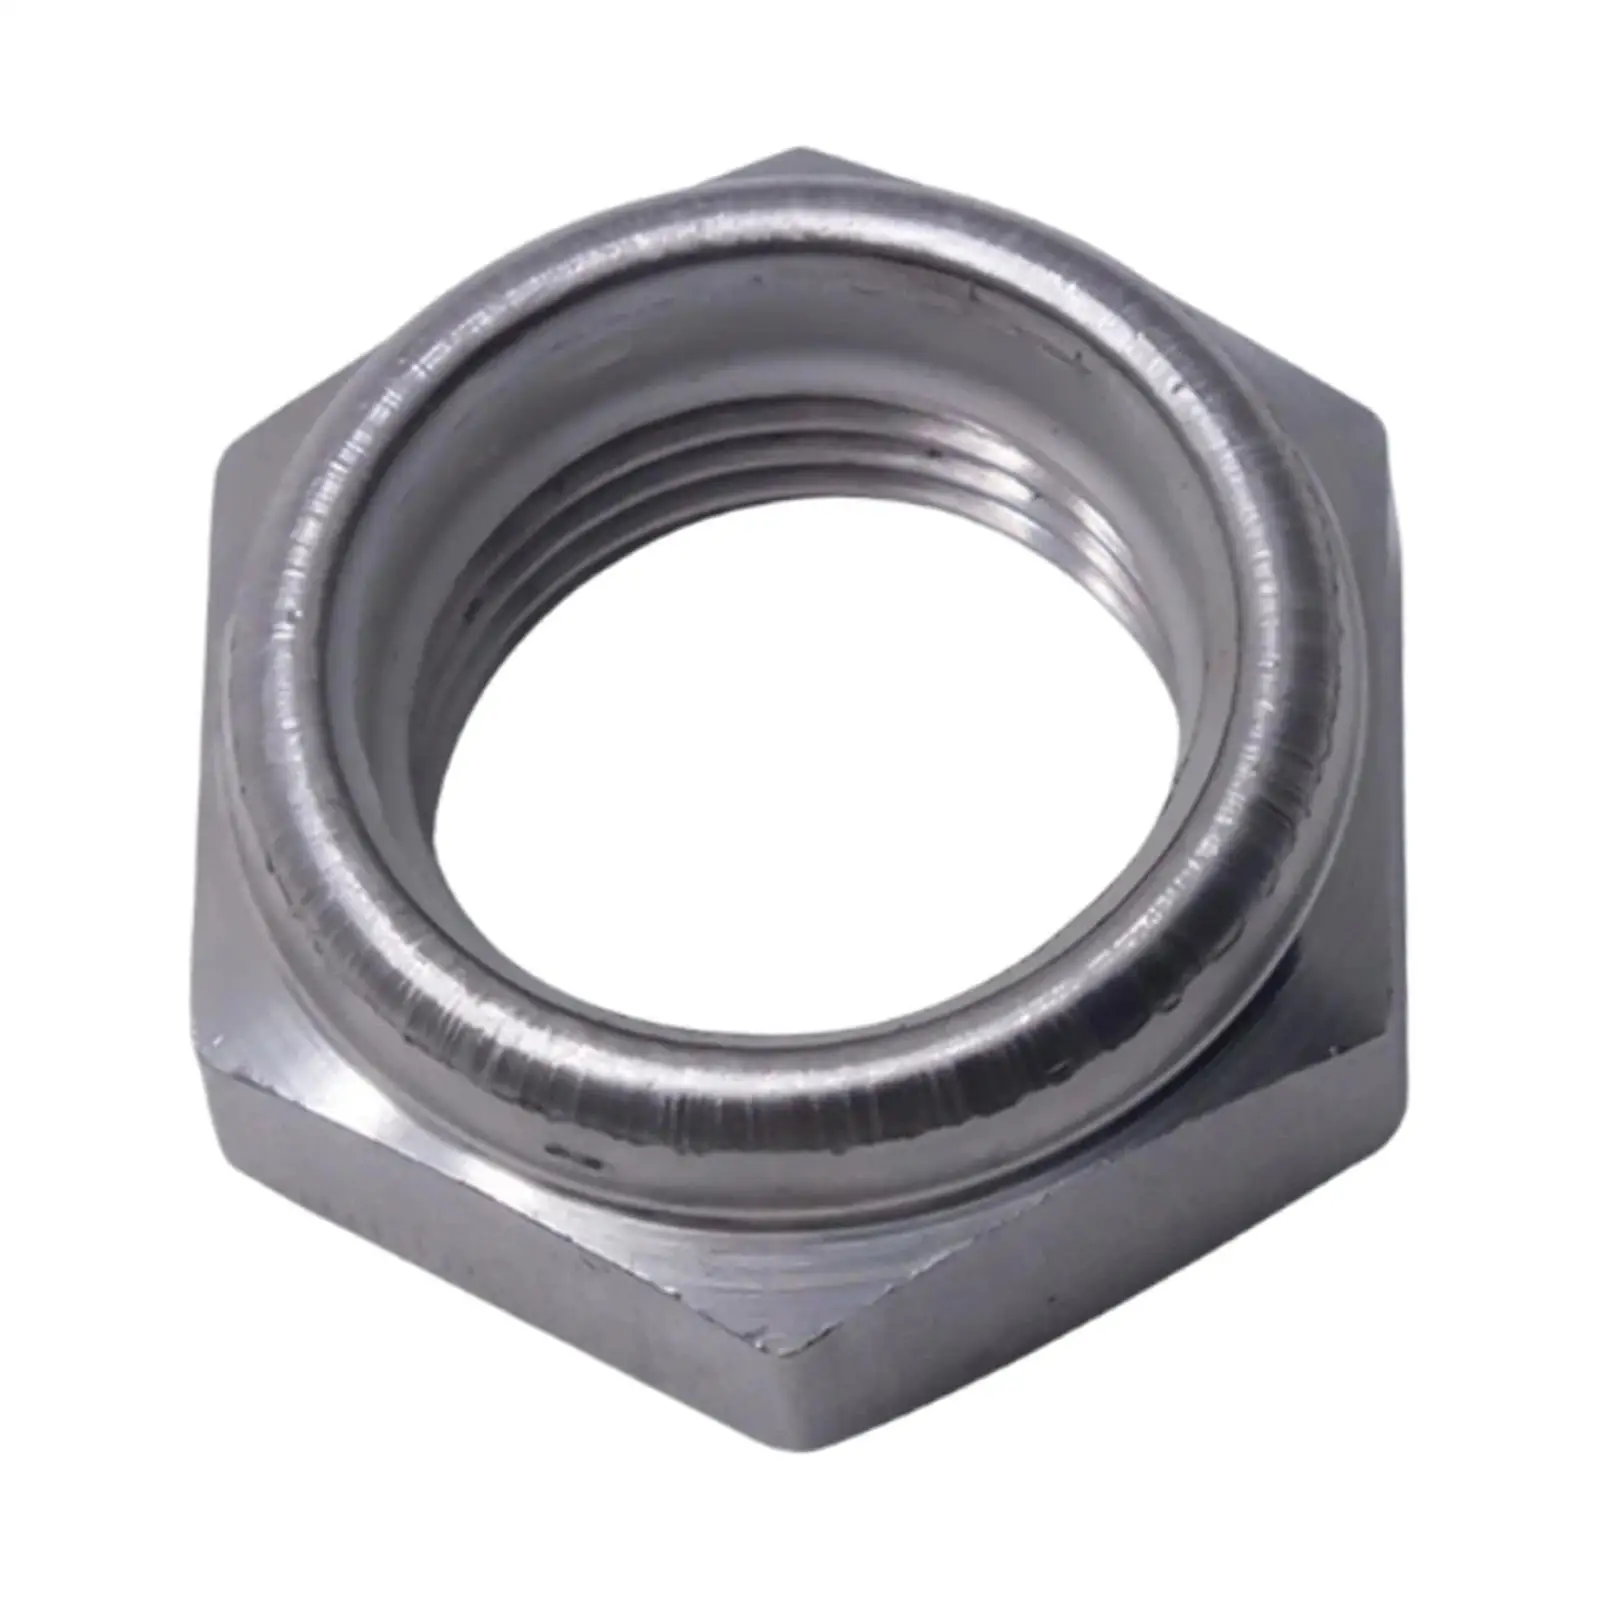 Self Locking Nut 90185-22043-00 Stainless Portable for Seapro Convenient Installation Automotive Accessories Professional